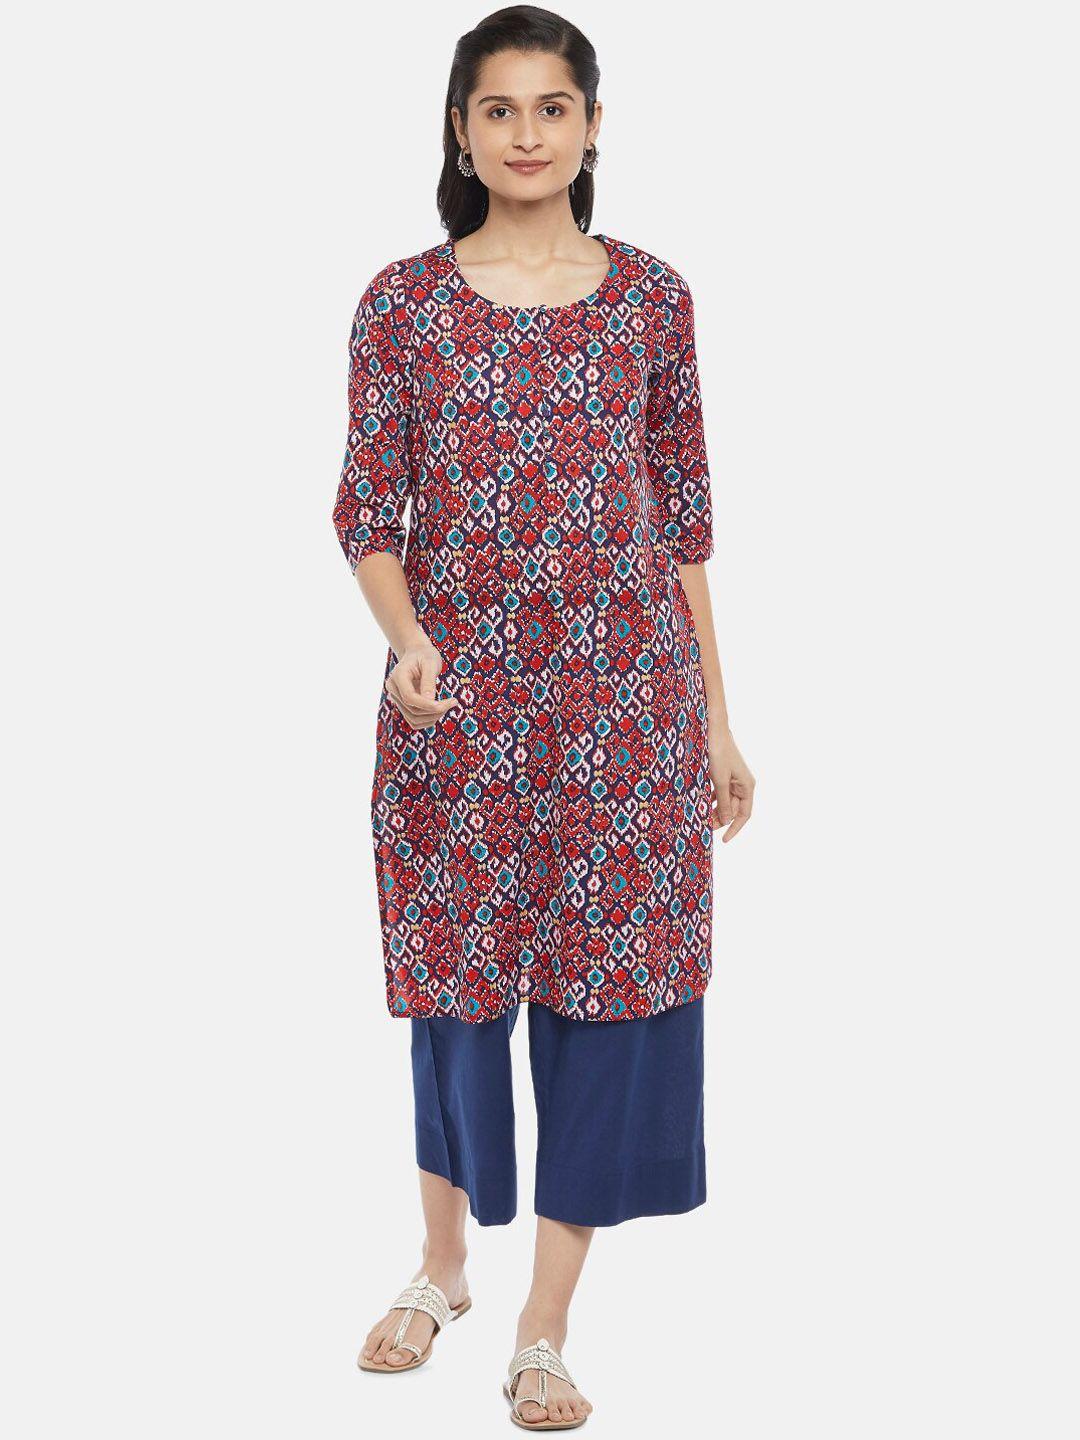 rangmanch by pantaloons women multicoloured floral printed pure cotton kurti with palazzos